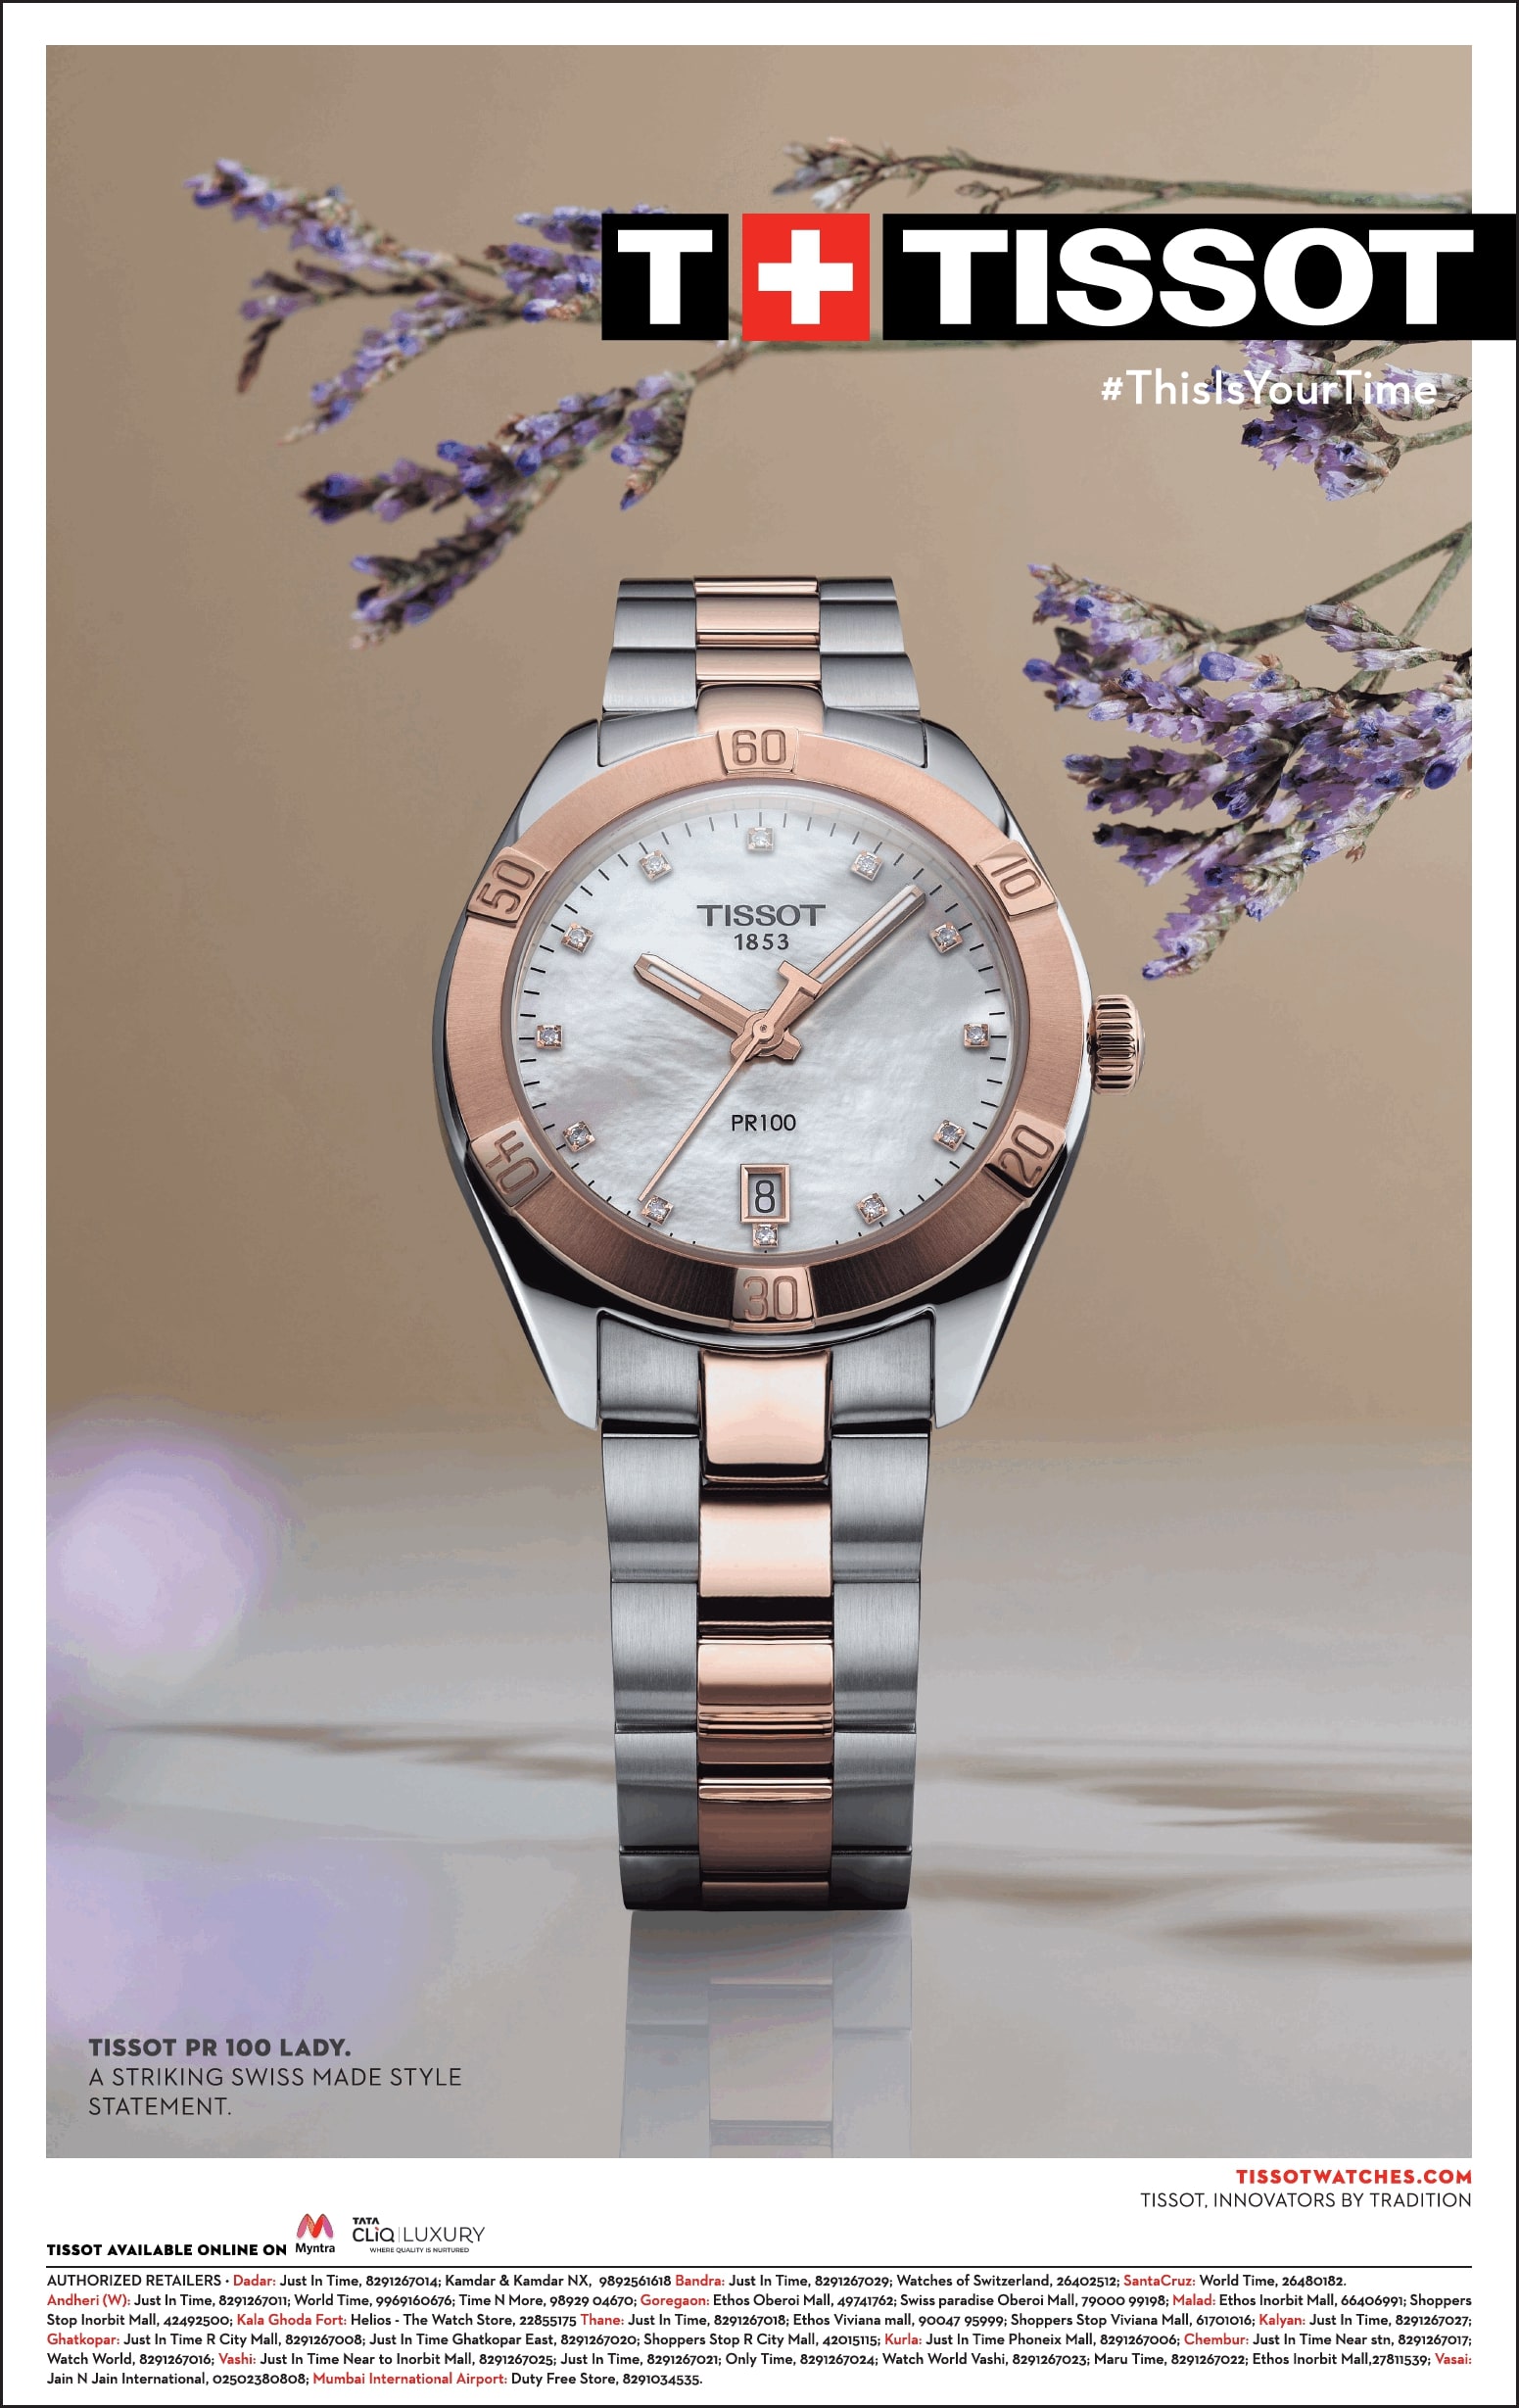 tissot-pr-100-lady-this-is-your-time-ad-bombay-times-12-02-2021